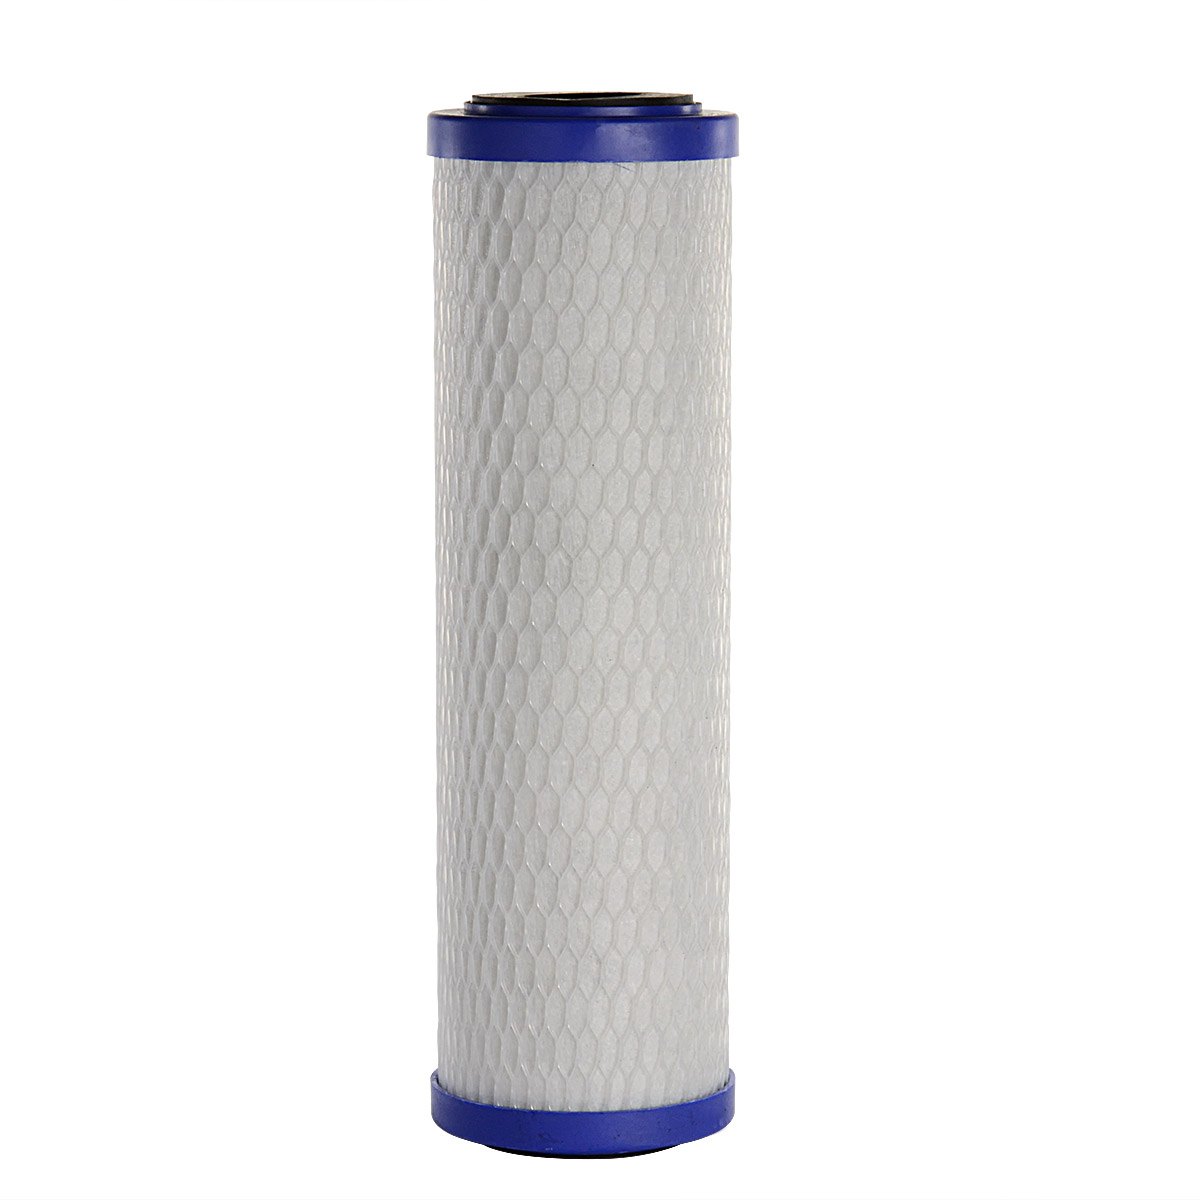 Filter 9 3/4 "10 microns with activated carbon